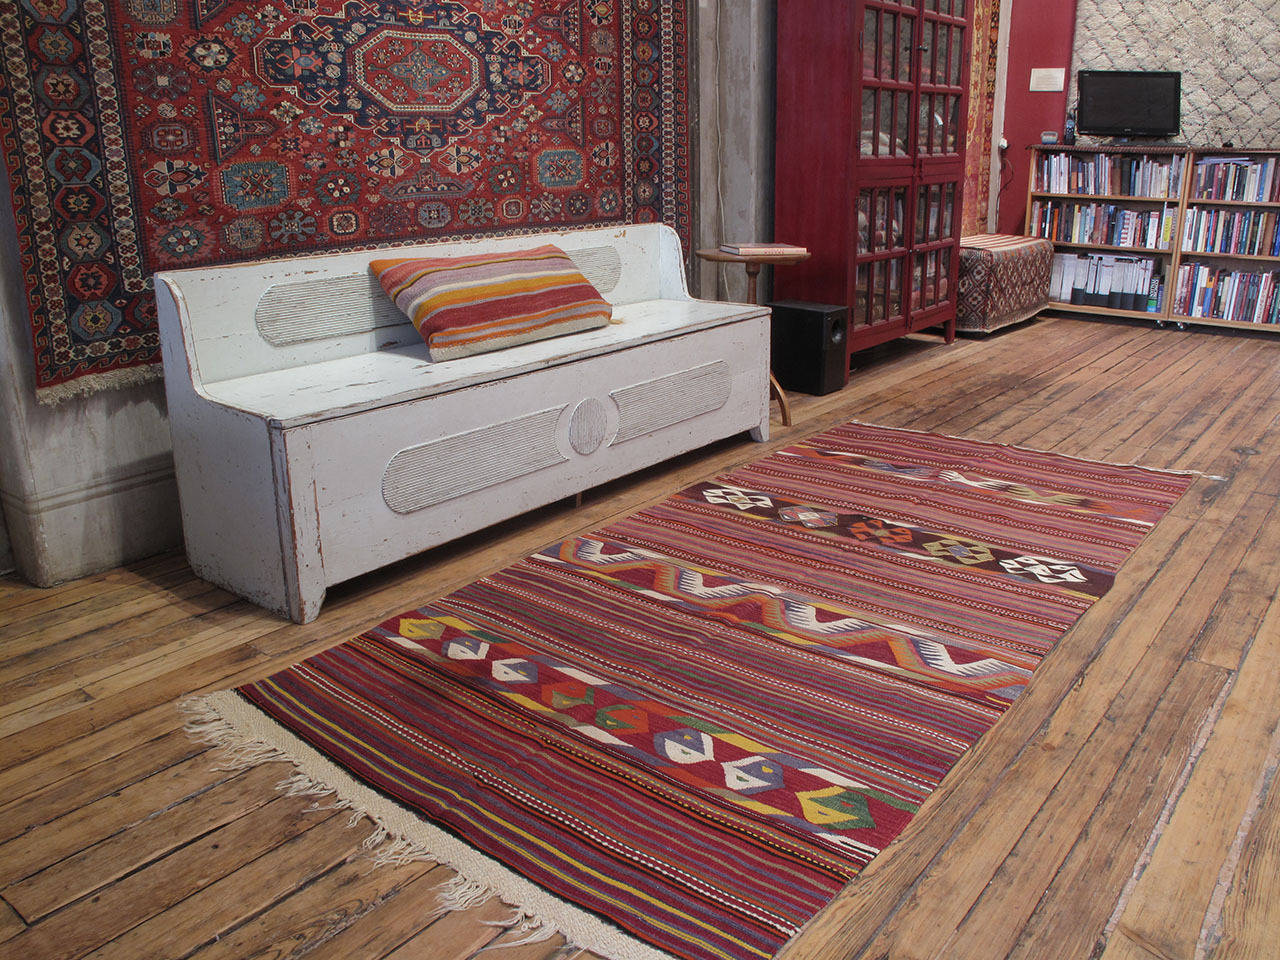 Konya Kilim rug. A beautiful old tribal flat-weave rug from Central Turkey. The weaver's use of four different designs in the wider bands, rather than repeating, is quite unusual. A very high quality and very sturdy Kilim rug.